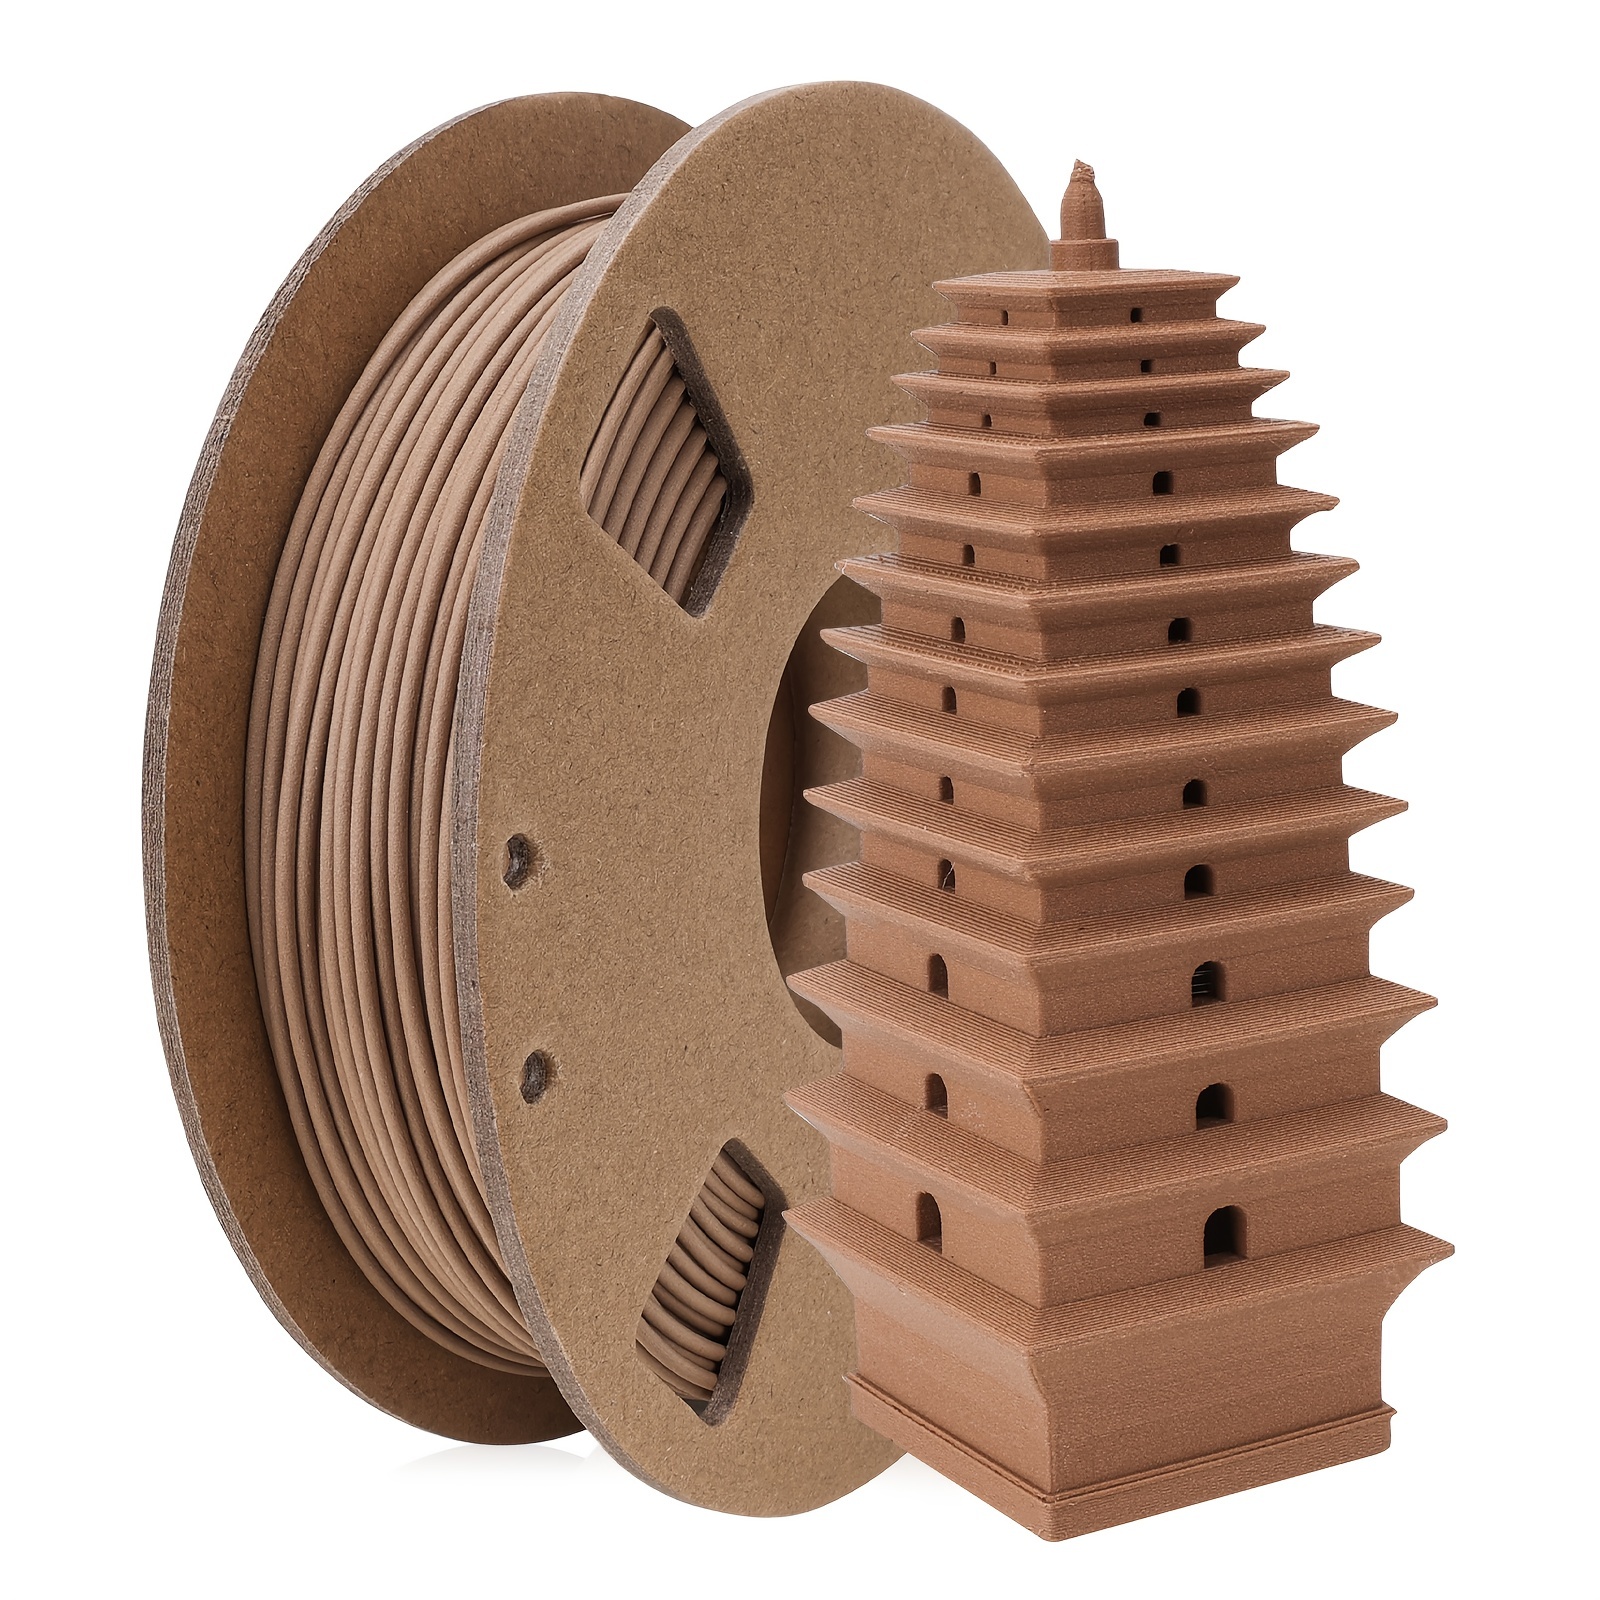 Timber Wood PLA Filament for 3D Printing - AGC Education